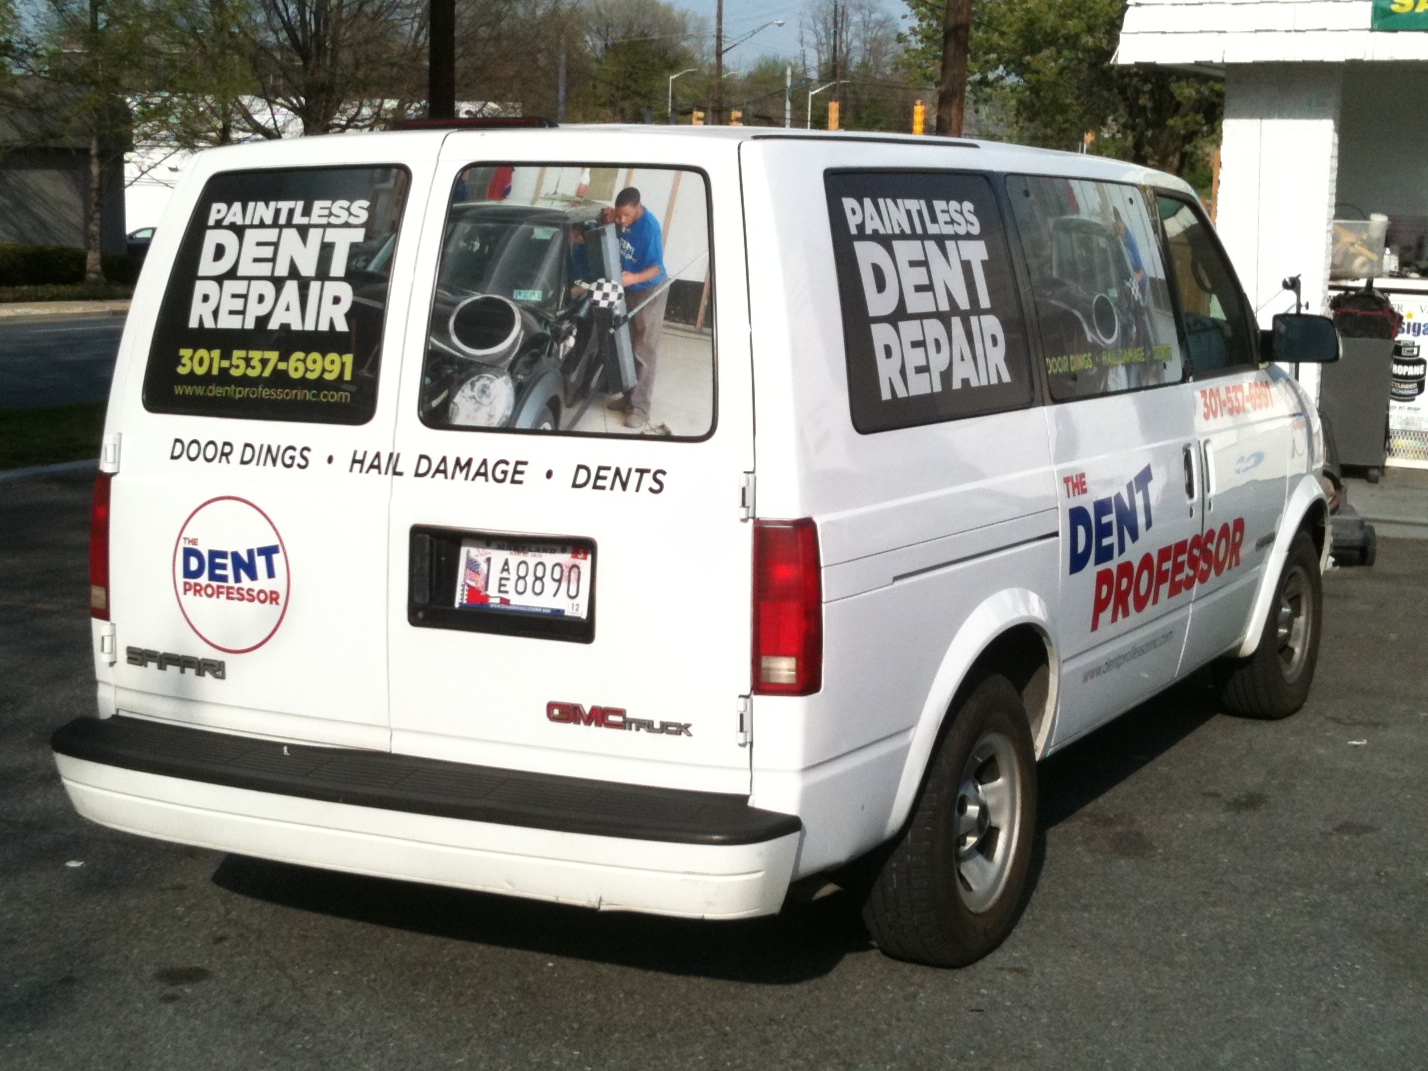 Full color prints on perforated vinyl plus vinyl lettering for vehicle application